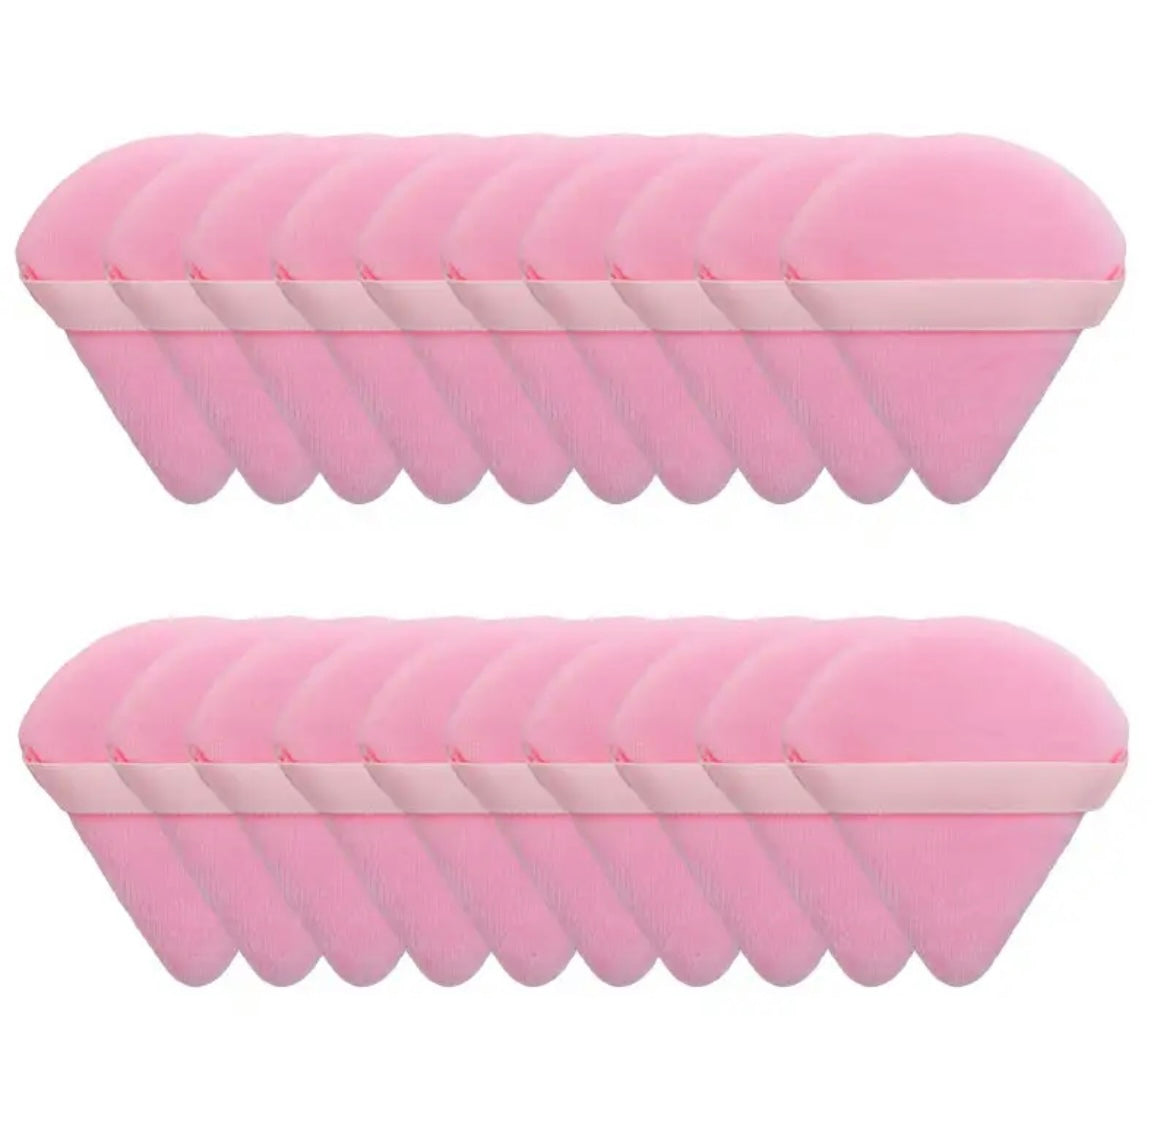 20 Pieces Triangle Shaped Powder Makeup Puff